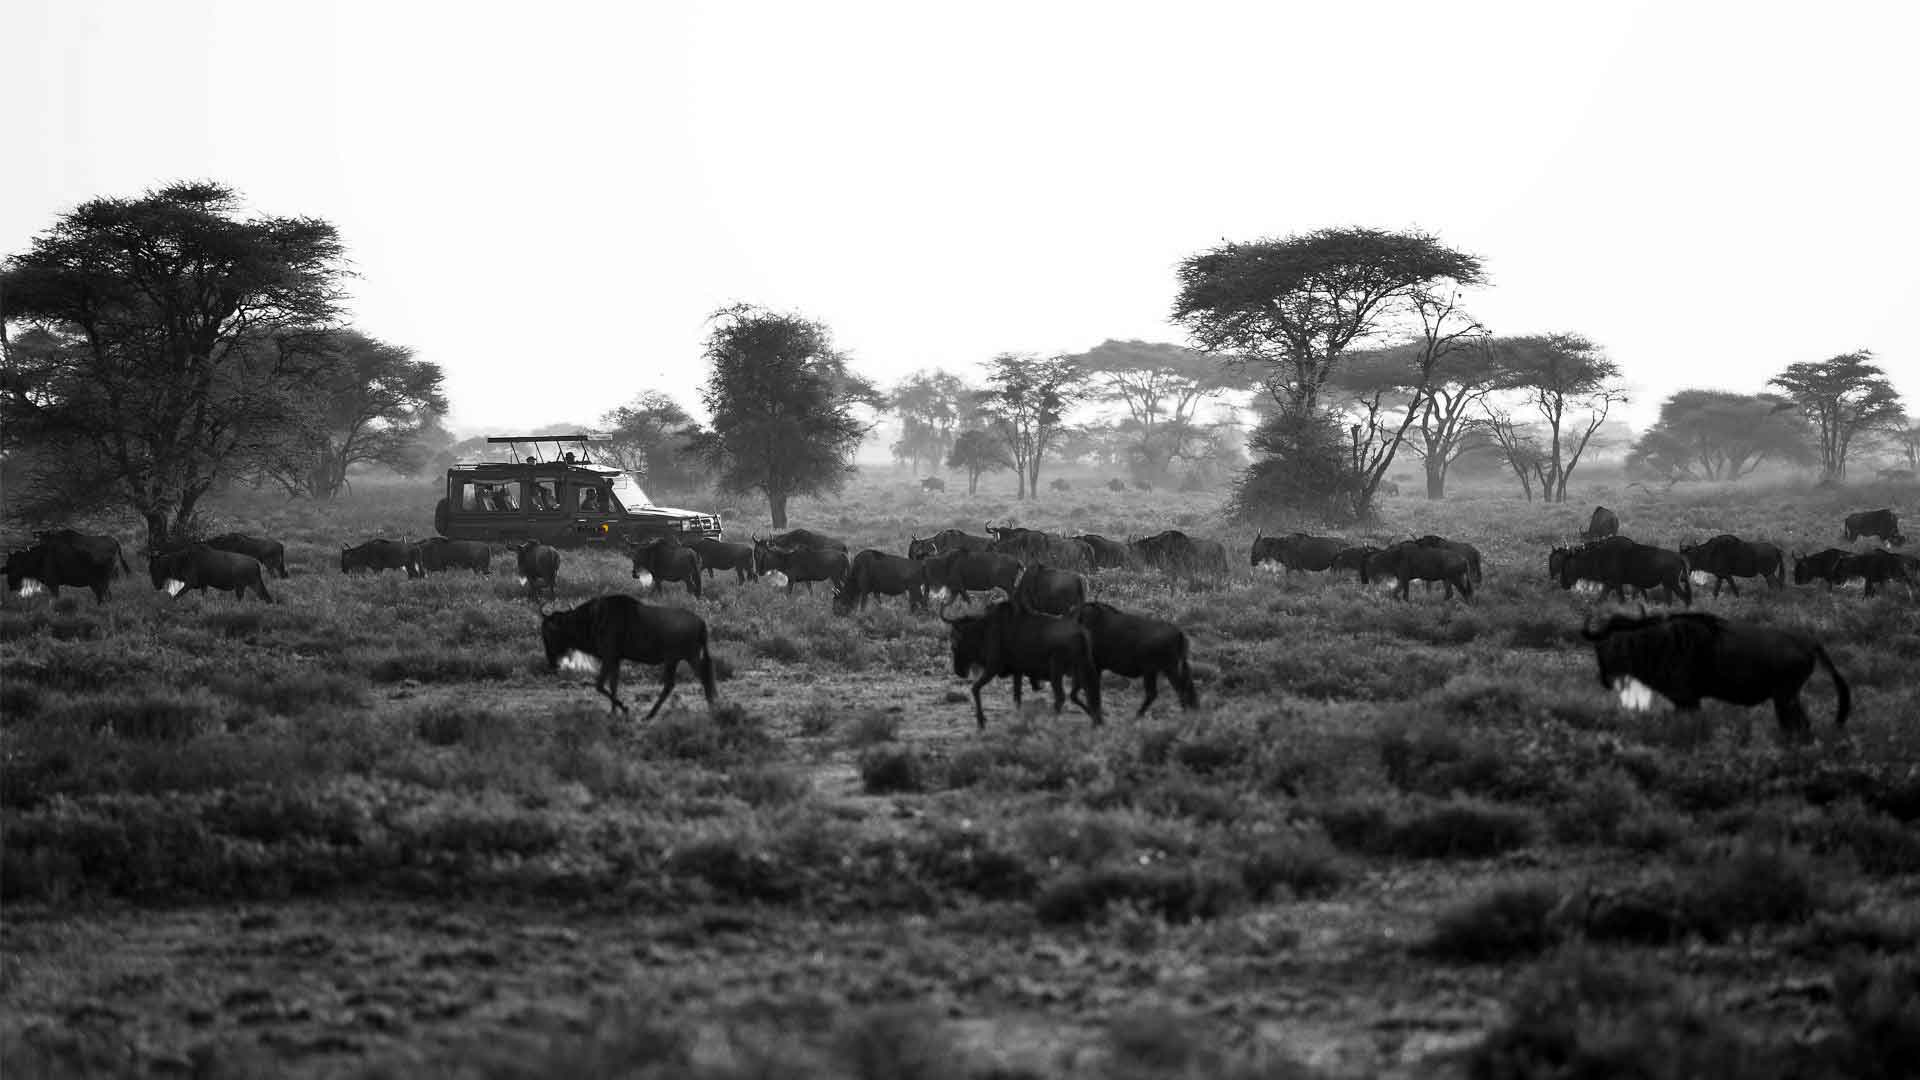 Amazing 10 Facts About The Great Wildebeest Migration In Serengeti